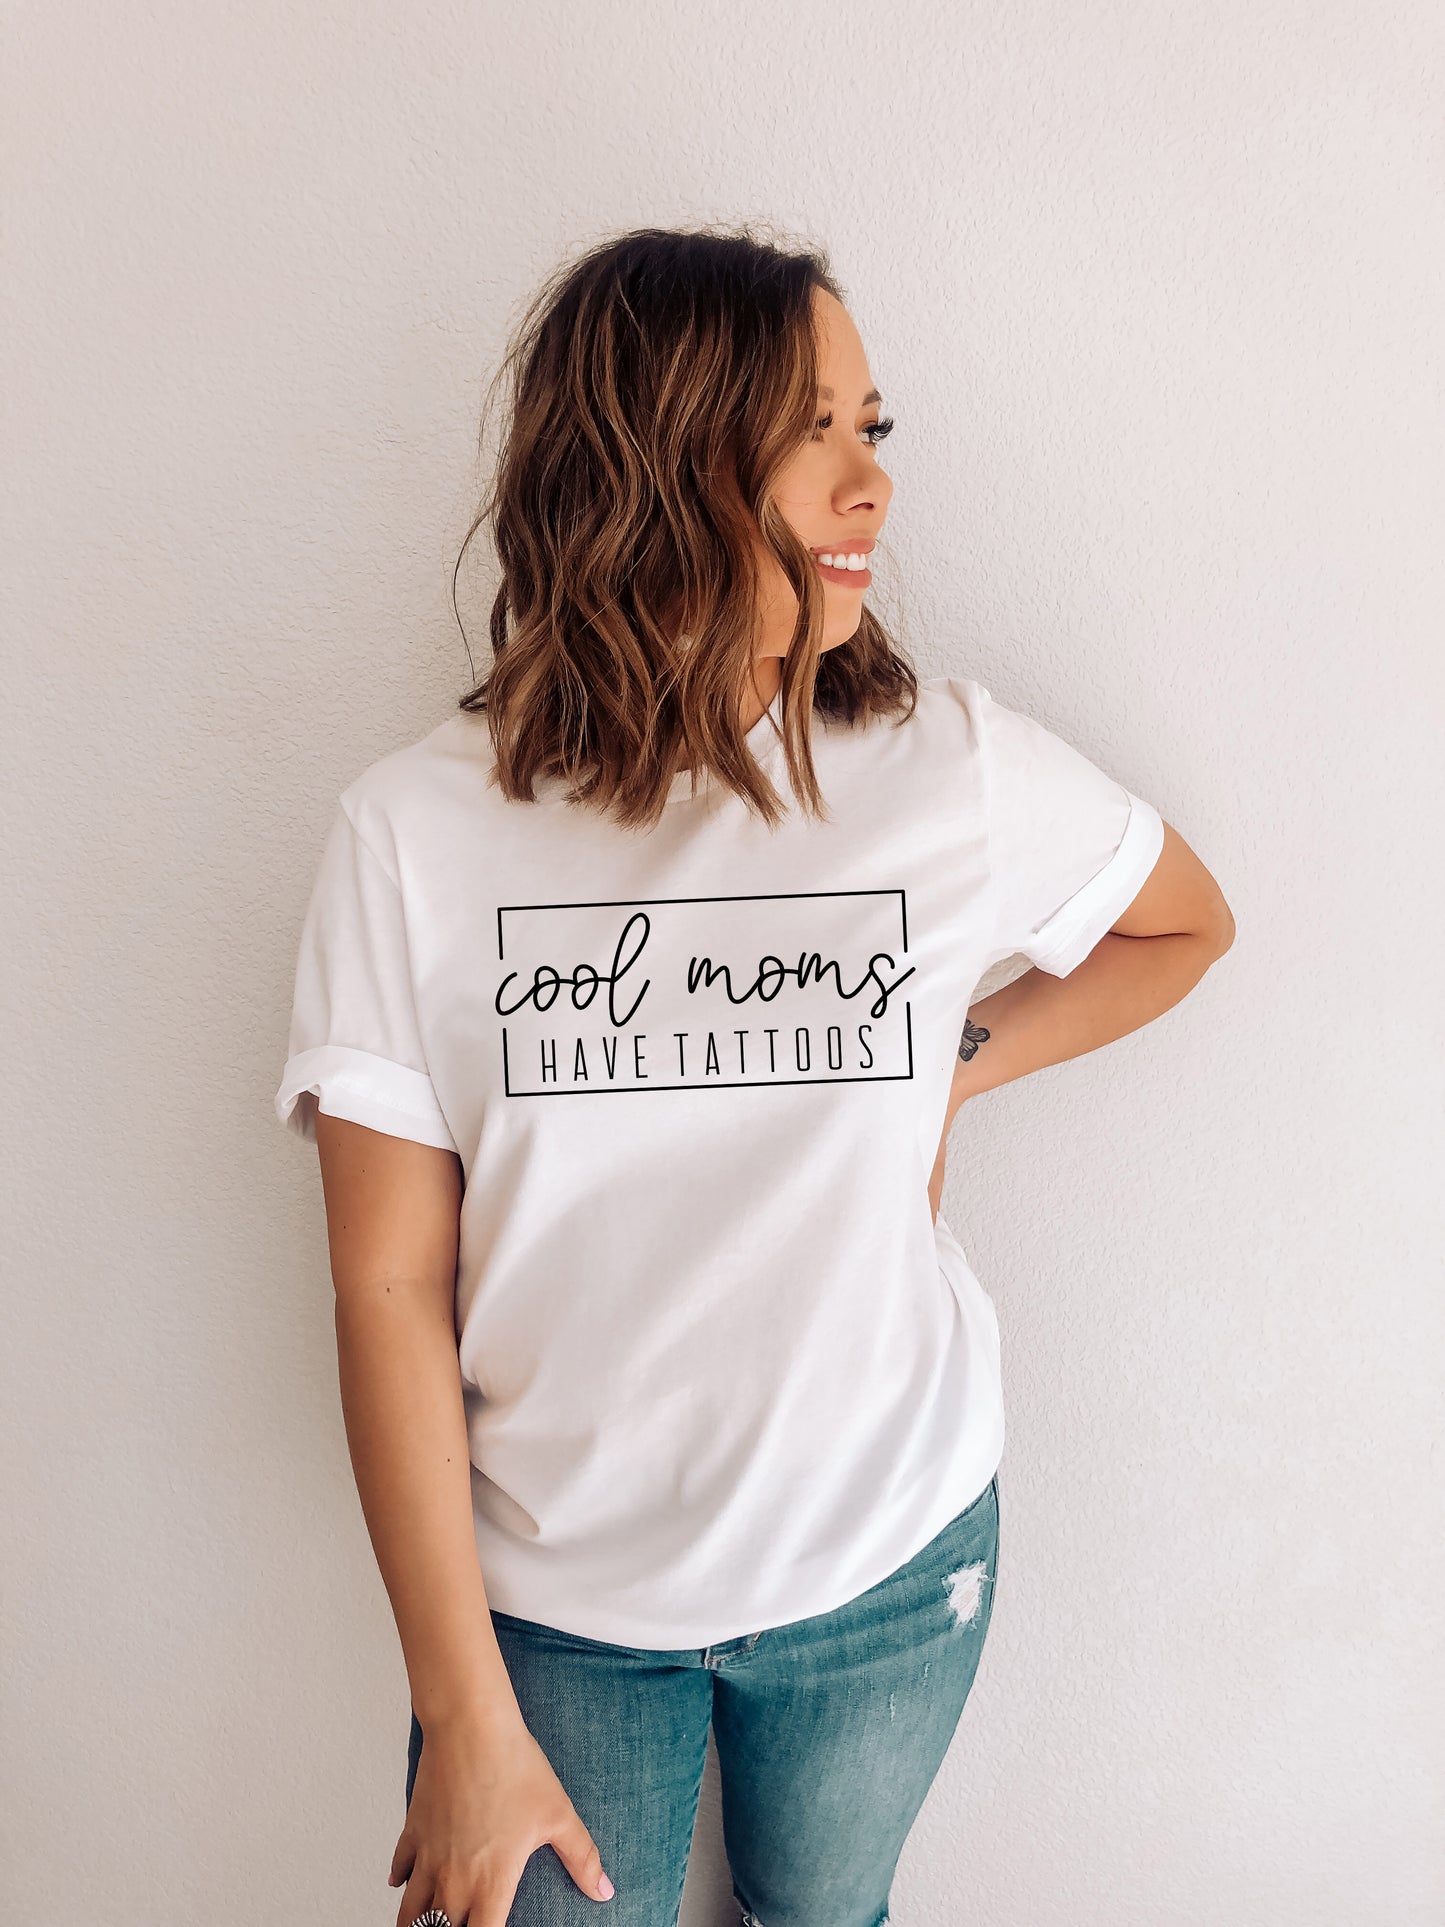 Cool Mom's Have Tattoos Tee